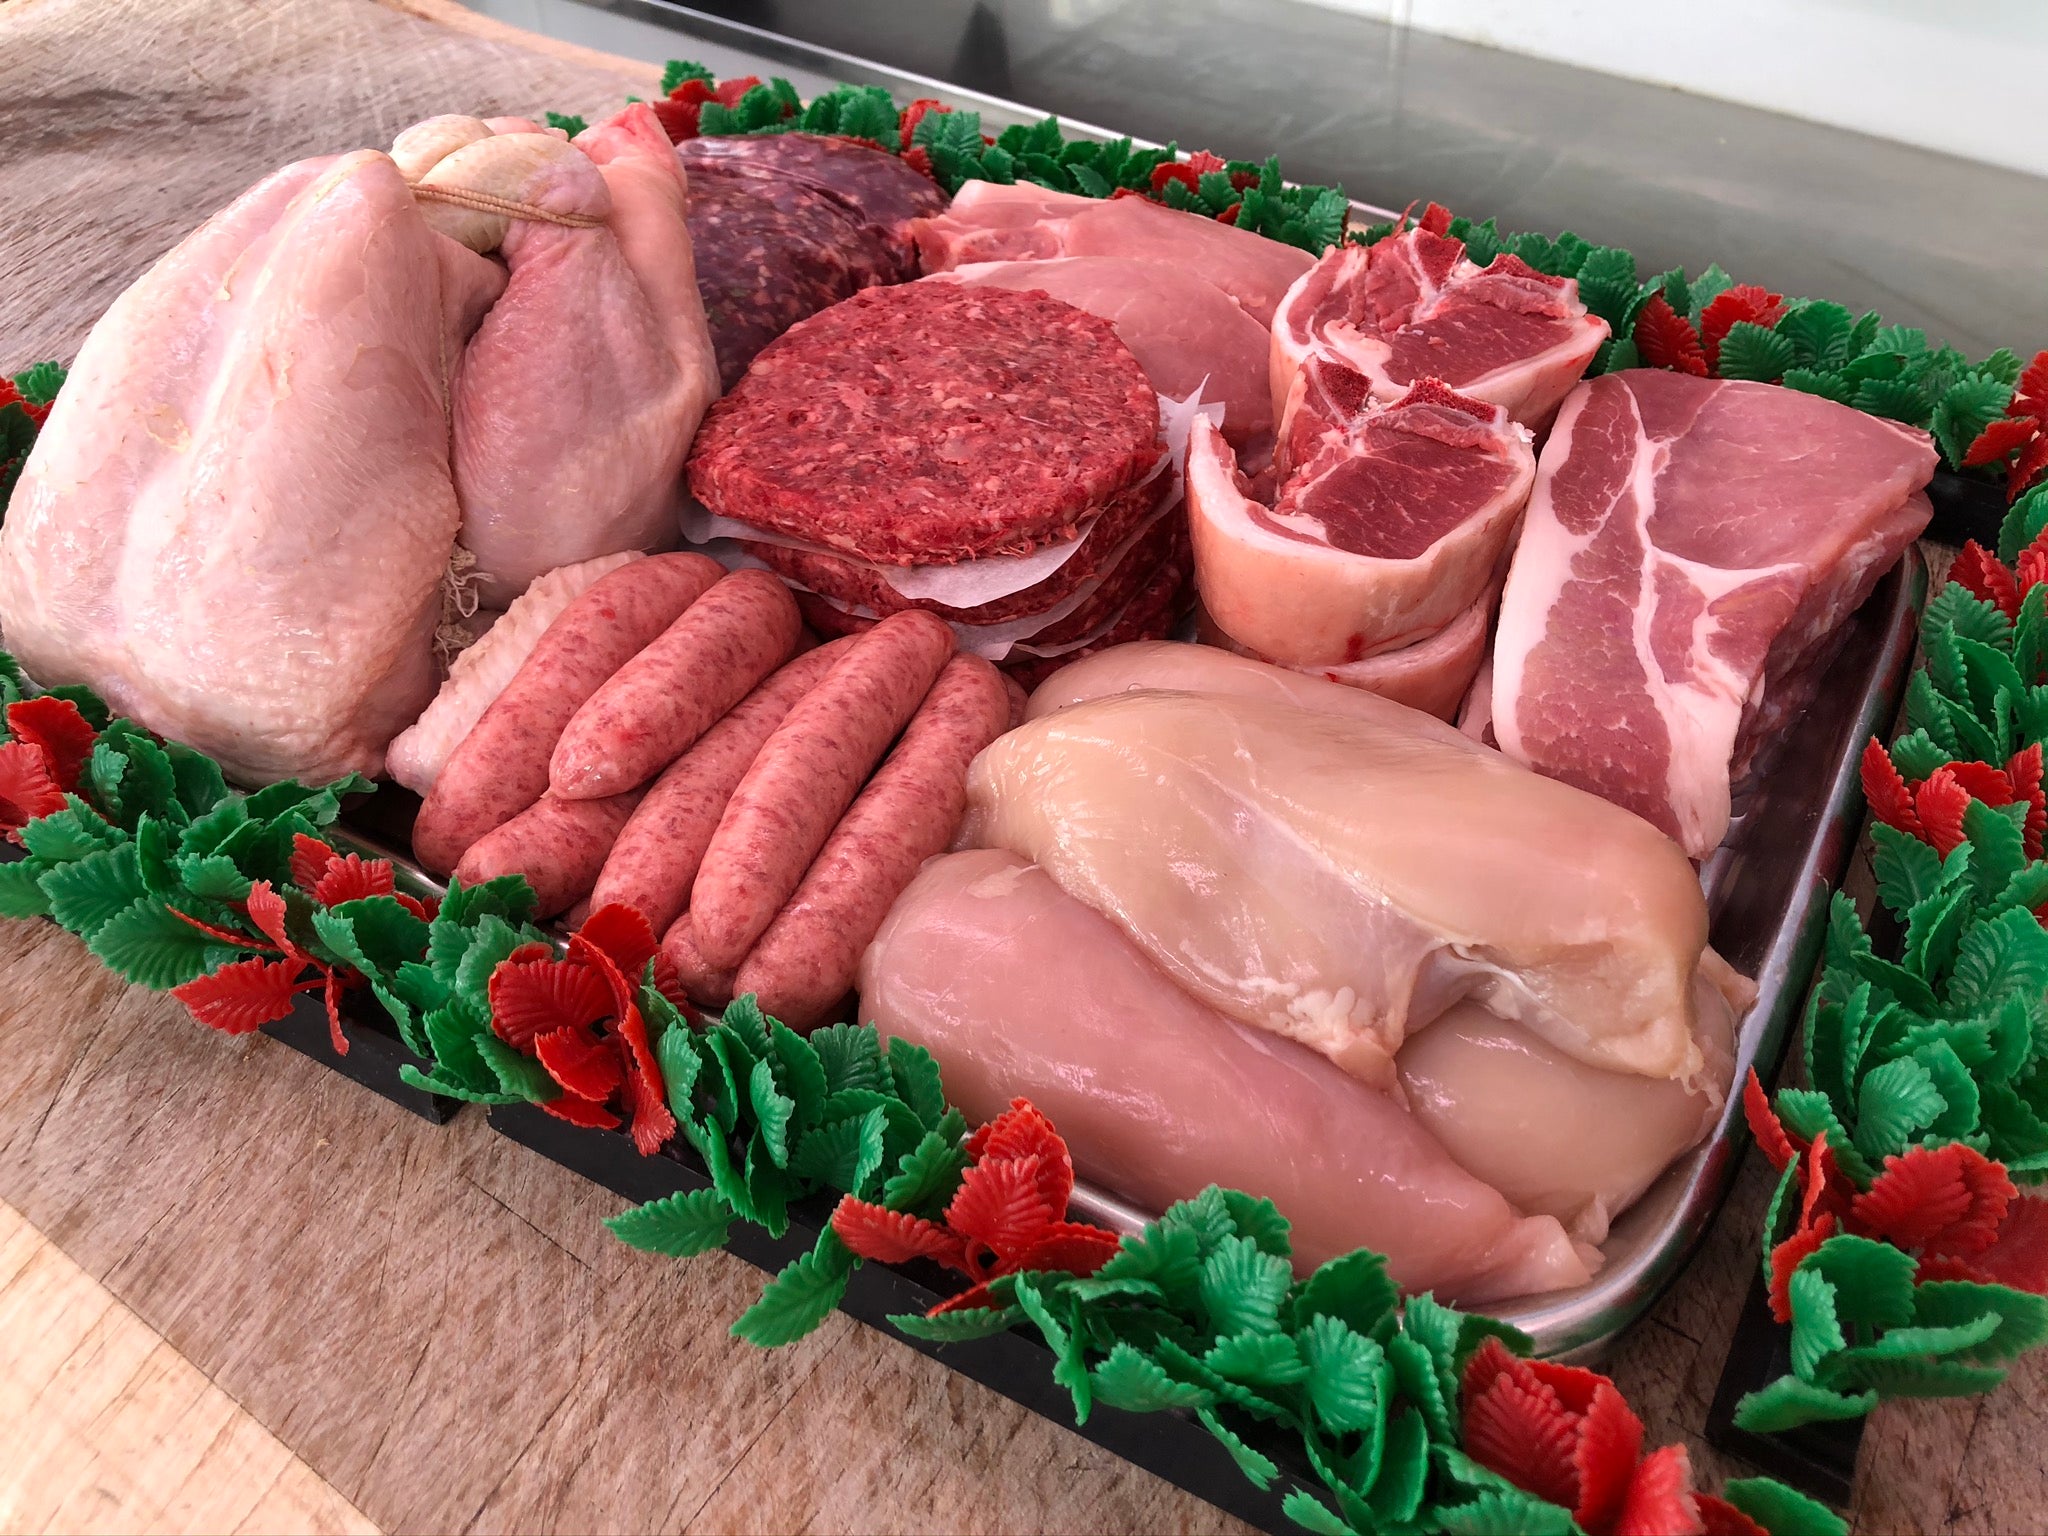 Let our Meat Department help you out for dinner tonight! 🥩 🍗 🥓 We have a  huge selection of pre-marinated meat for you and your family to enjoy!  Whether